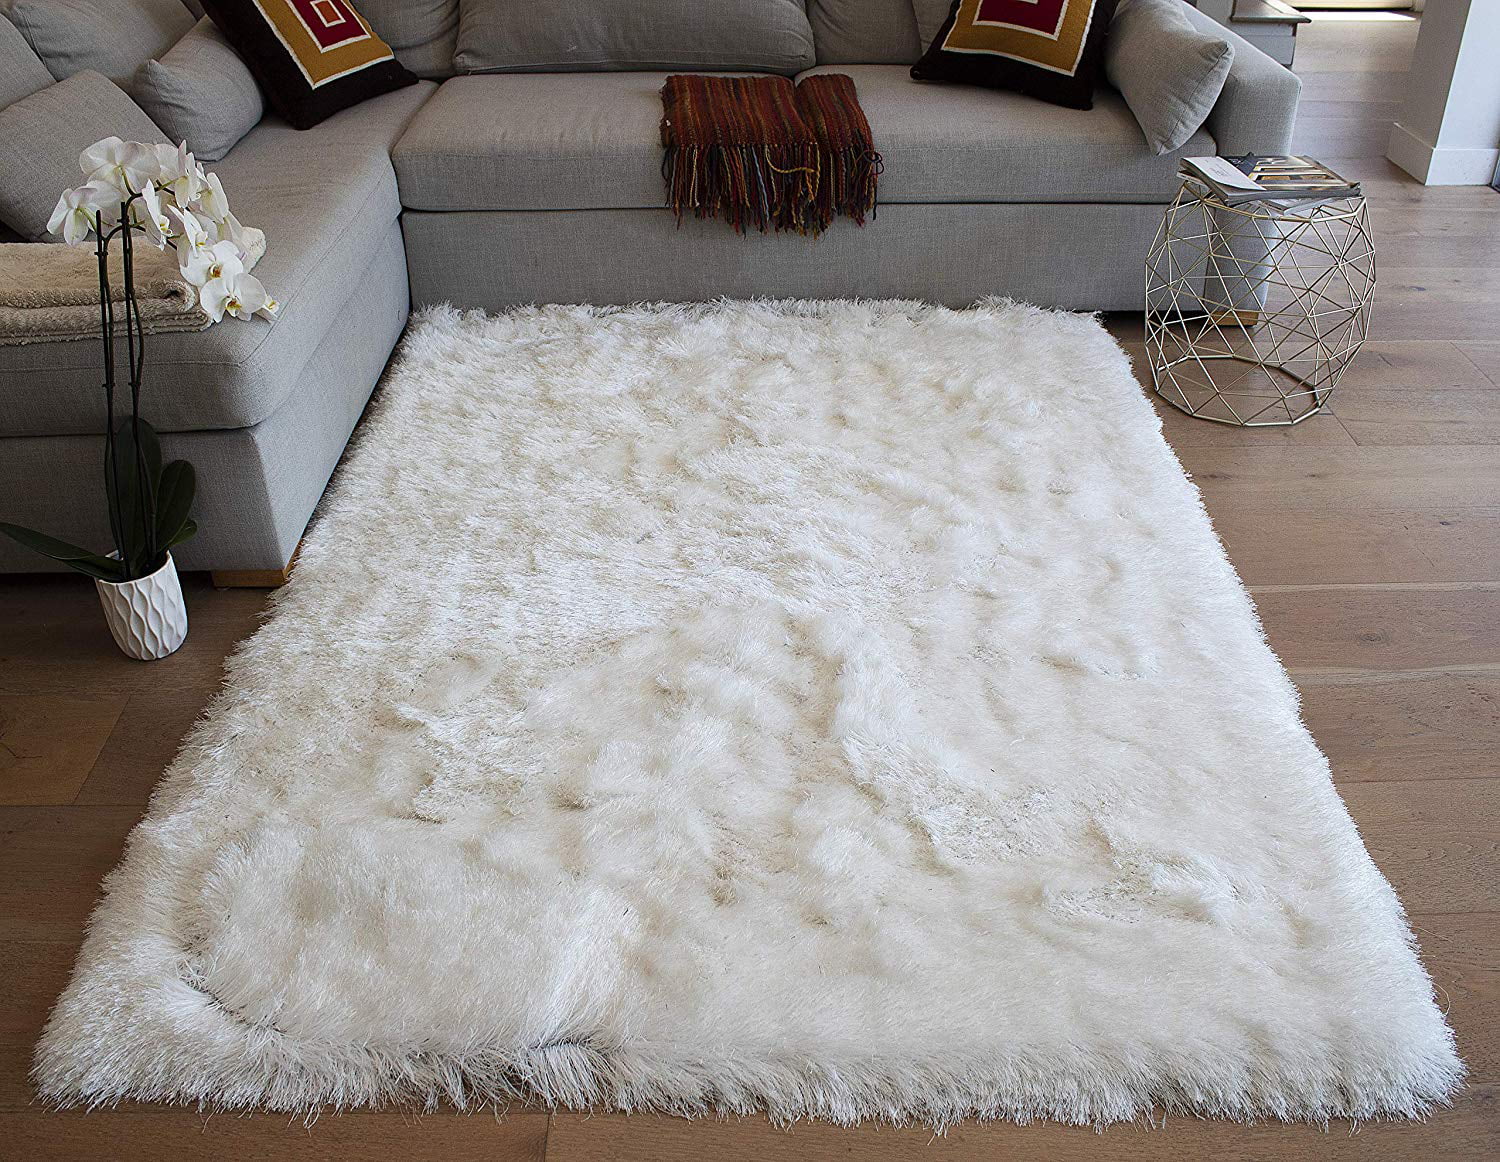 Furry Rug In Plaid Living Room